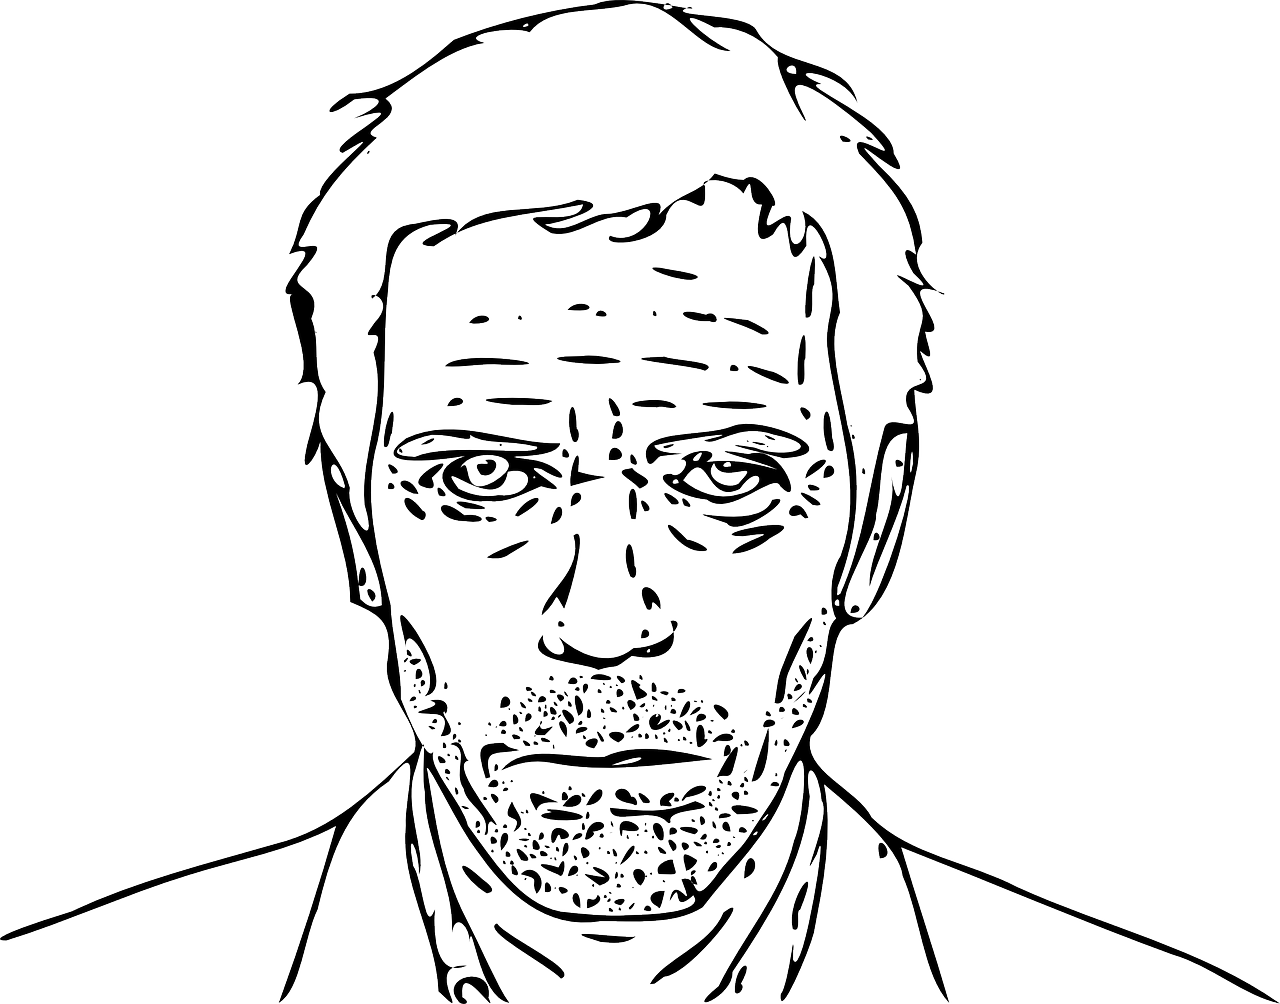 clipart doctor black and white